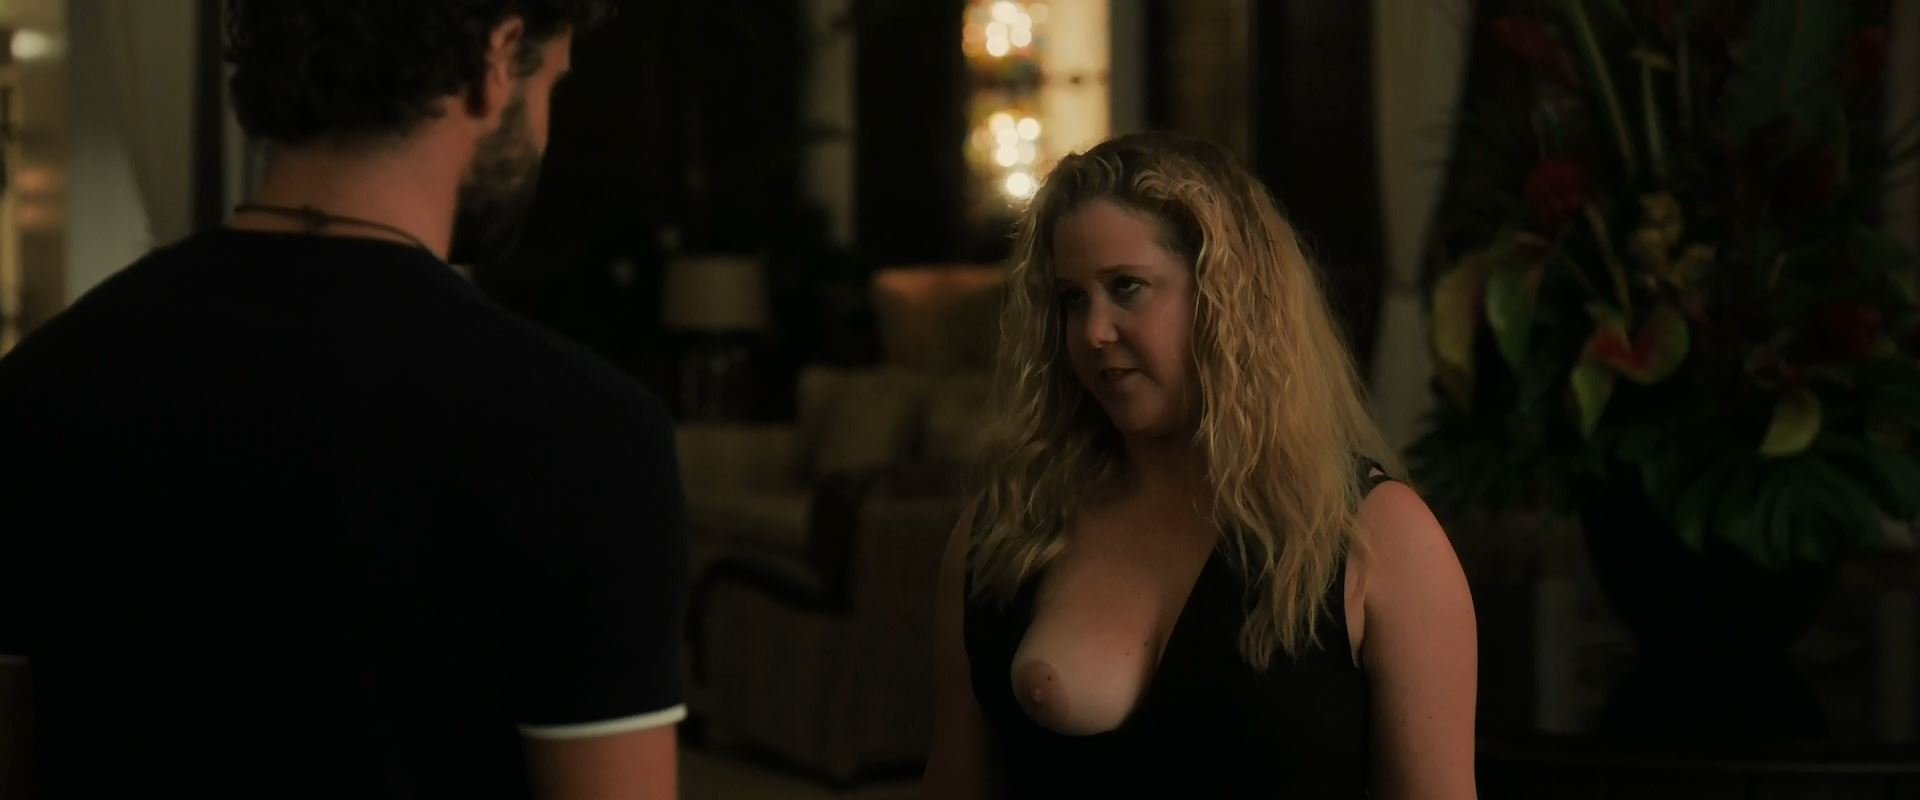 Amy Schumer Nude & Sexy - Snatched (2017) 1080p BluRay